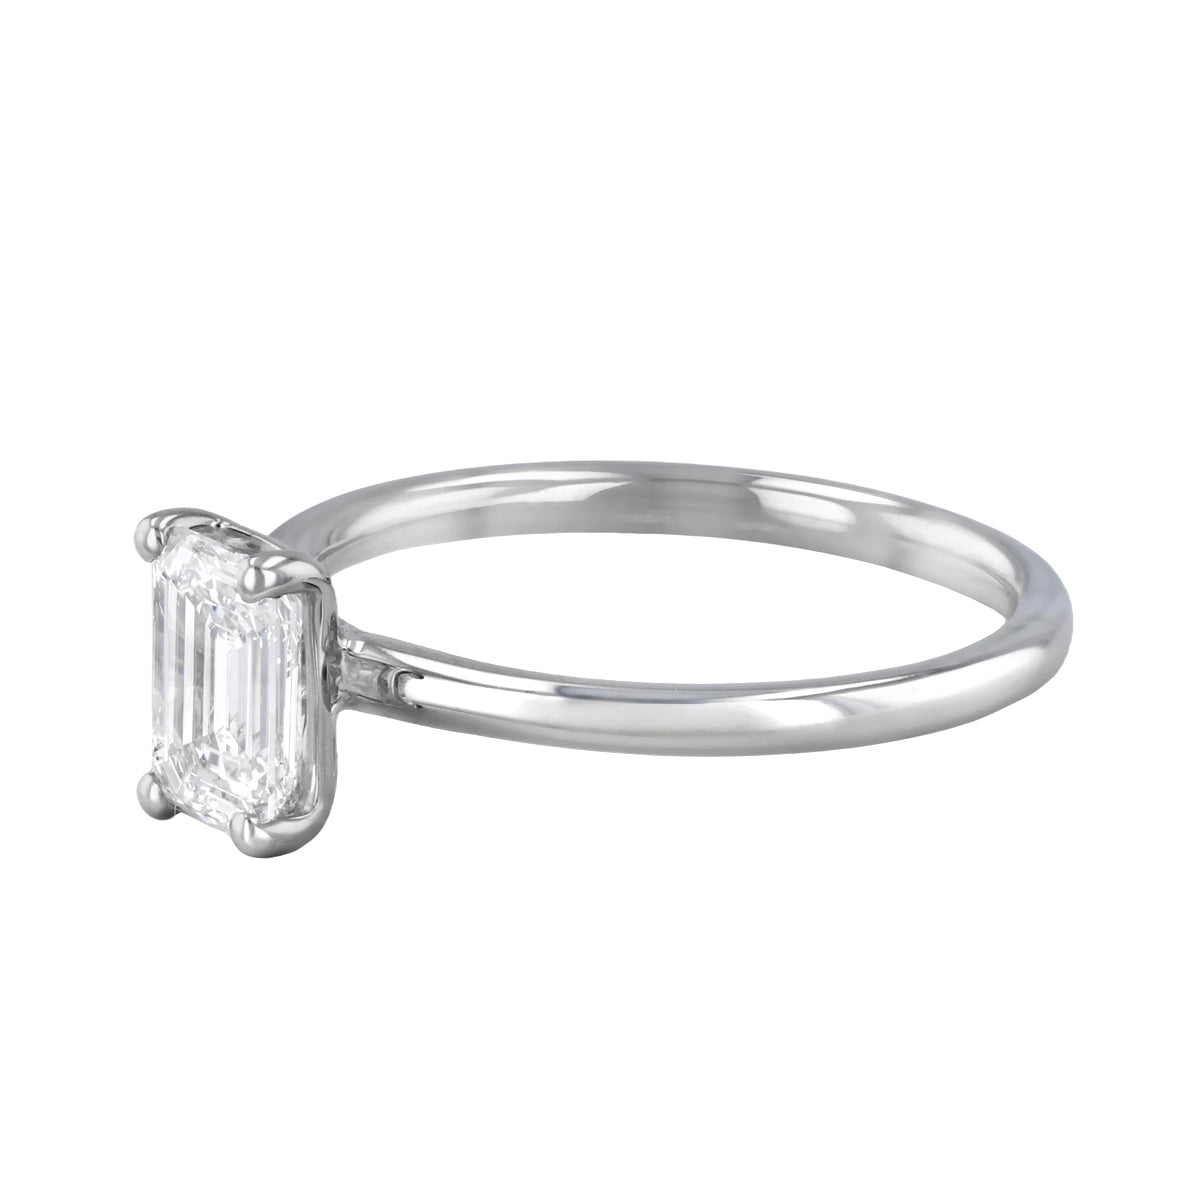 0-35ct-sofia-emerald-cut-solitaire-diamond-engagement-ring-18ct-white-gold